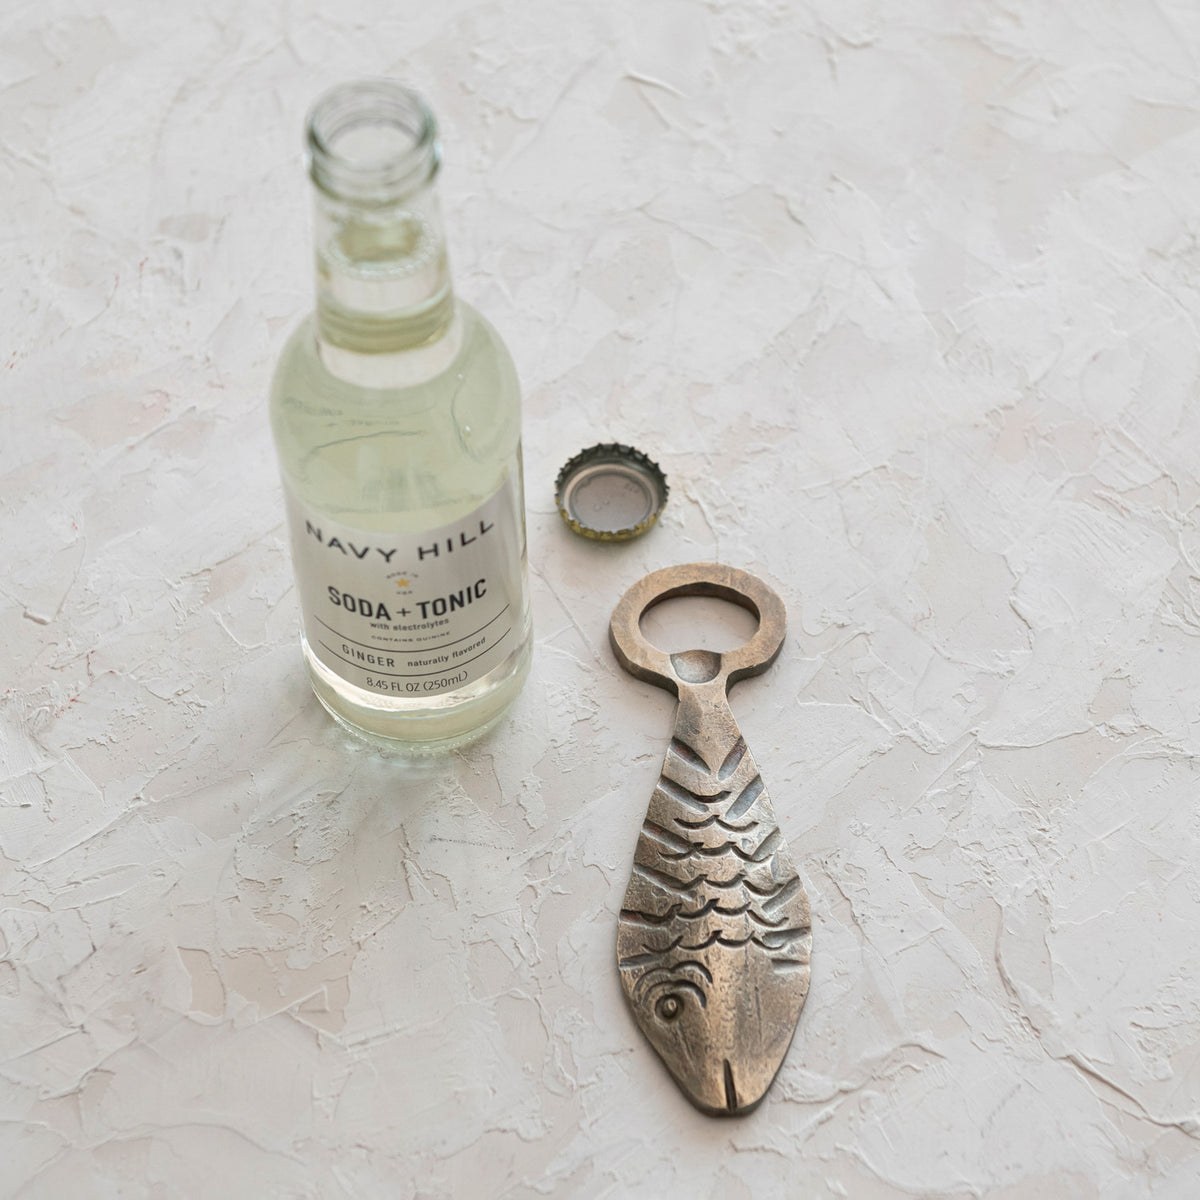 Cast Metal Fish Bottle Opener with Antique Brass Finish